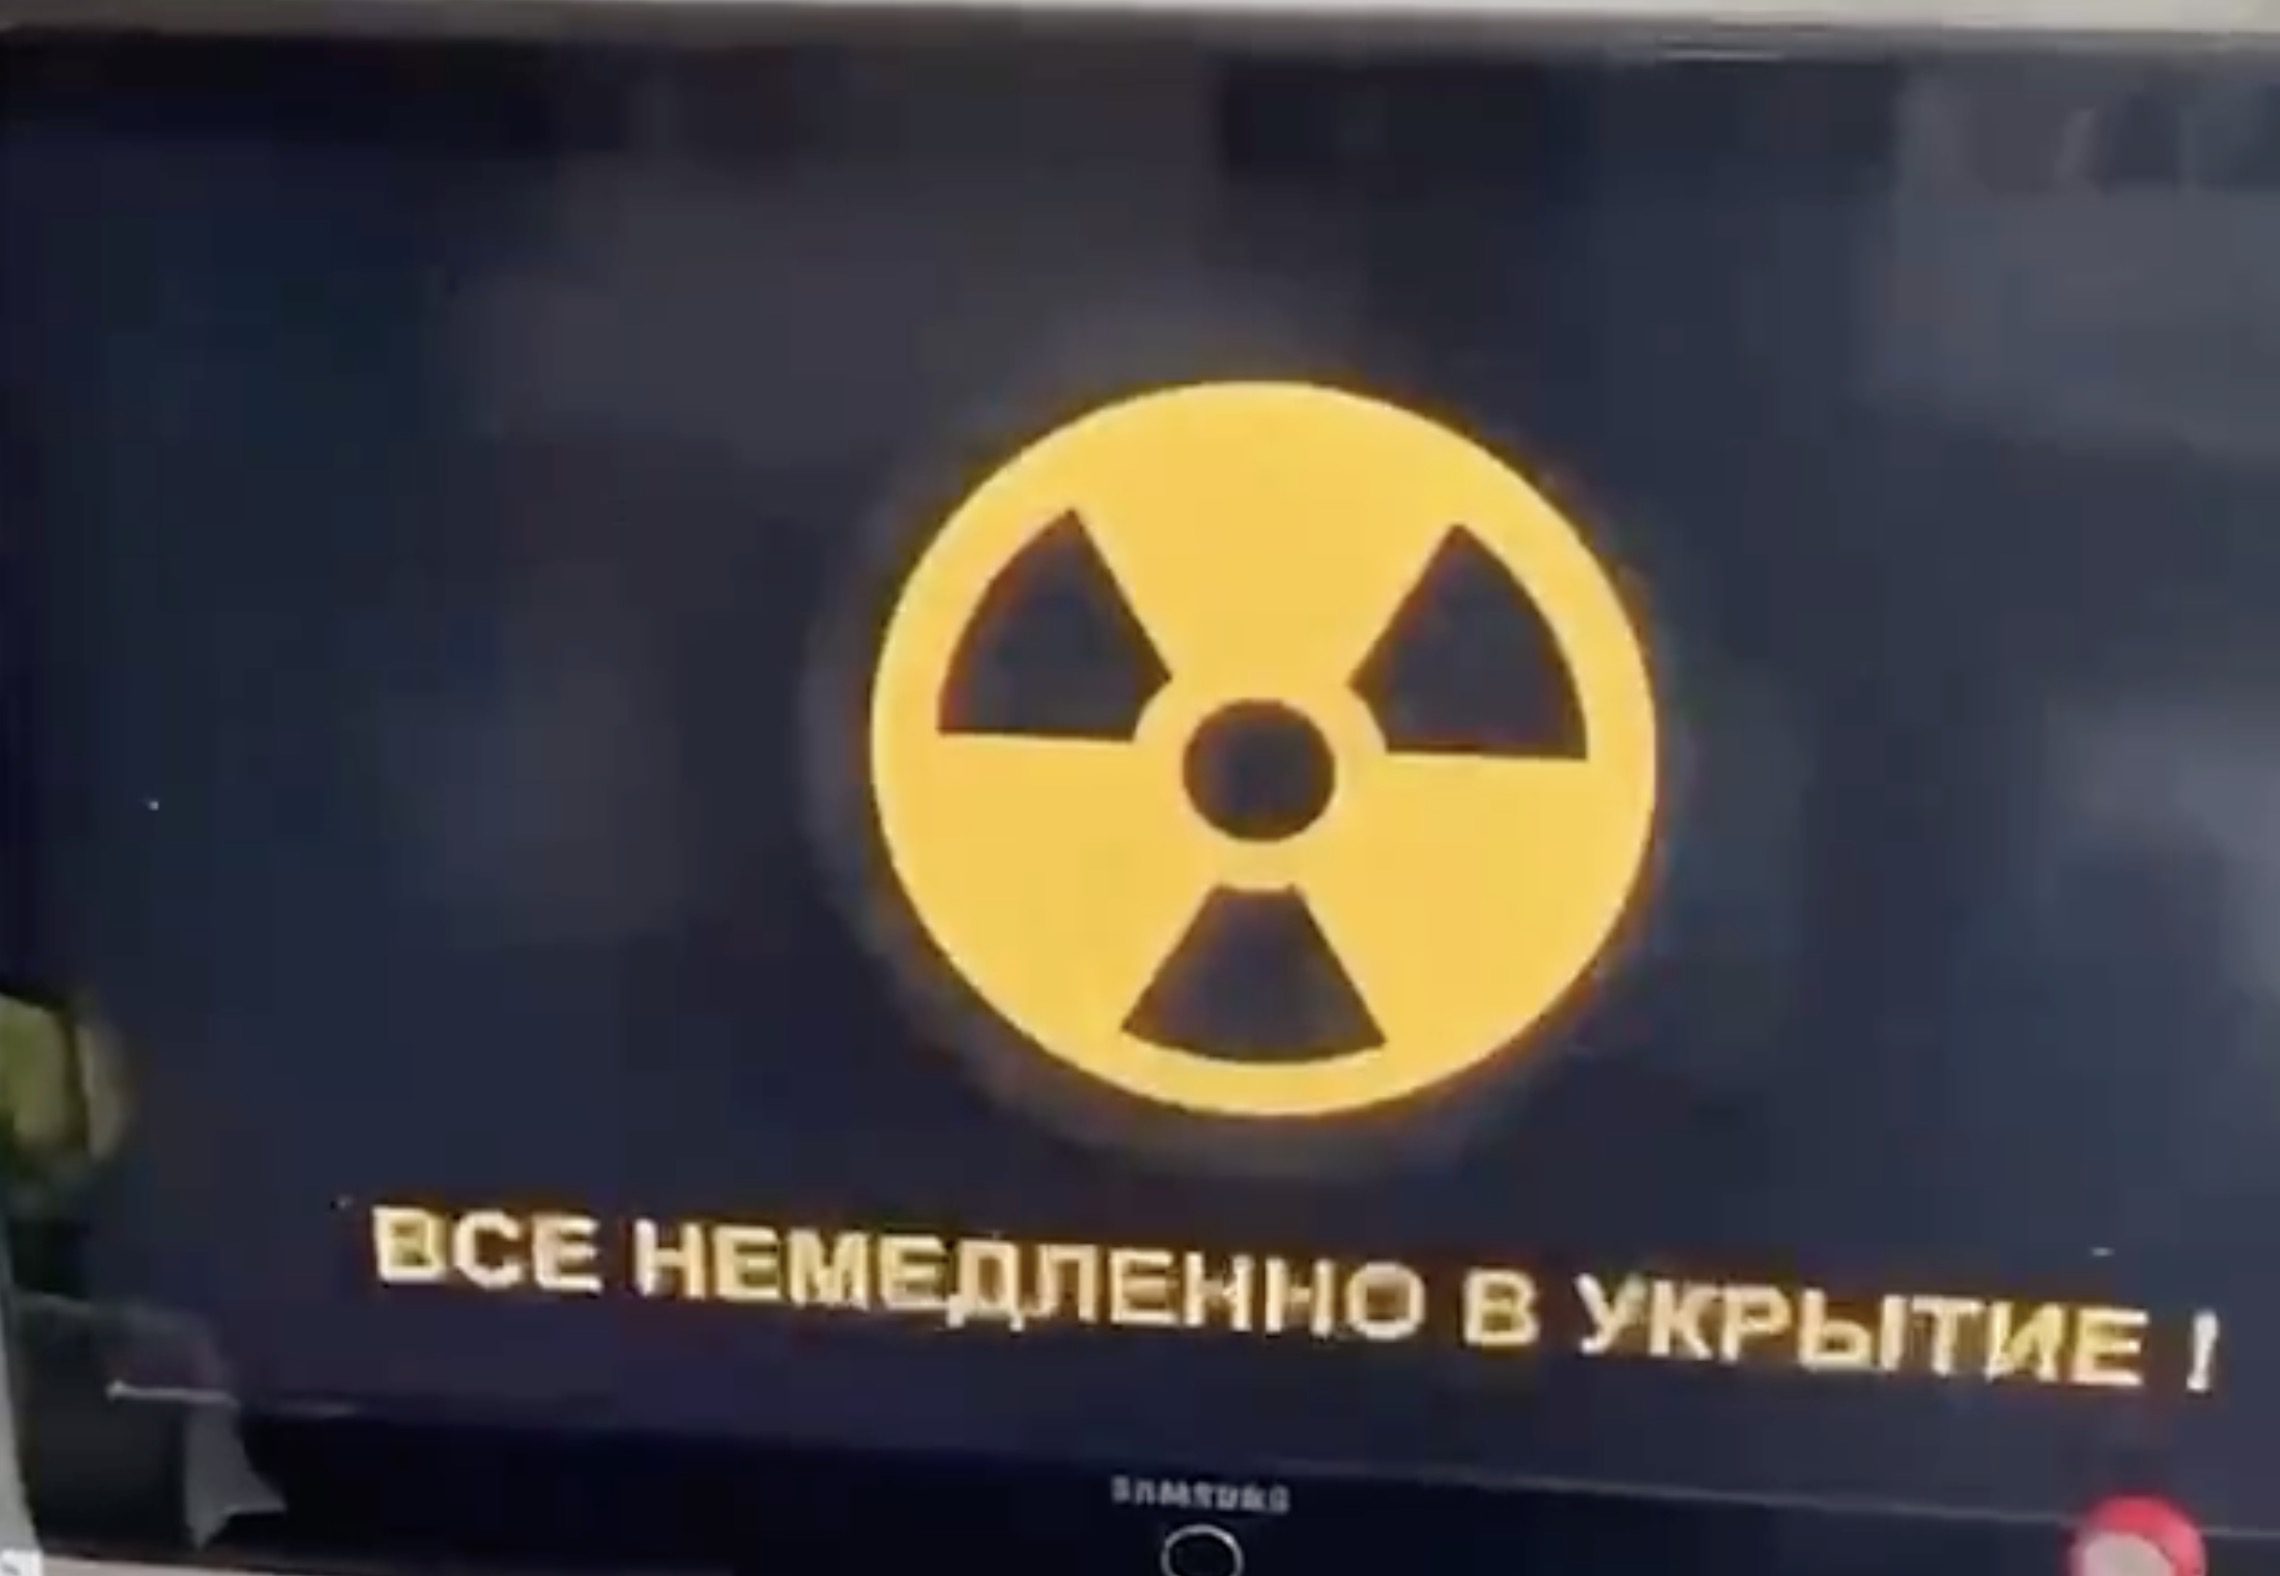 Russian Broadcasting Announces a “Nuclear Strike Has Been Conducted” After Hackers Break Into System (VIDEO)